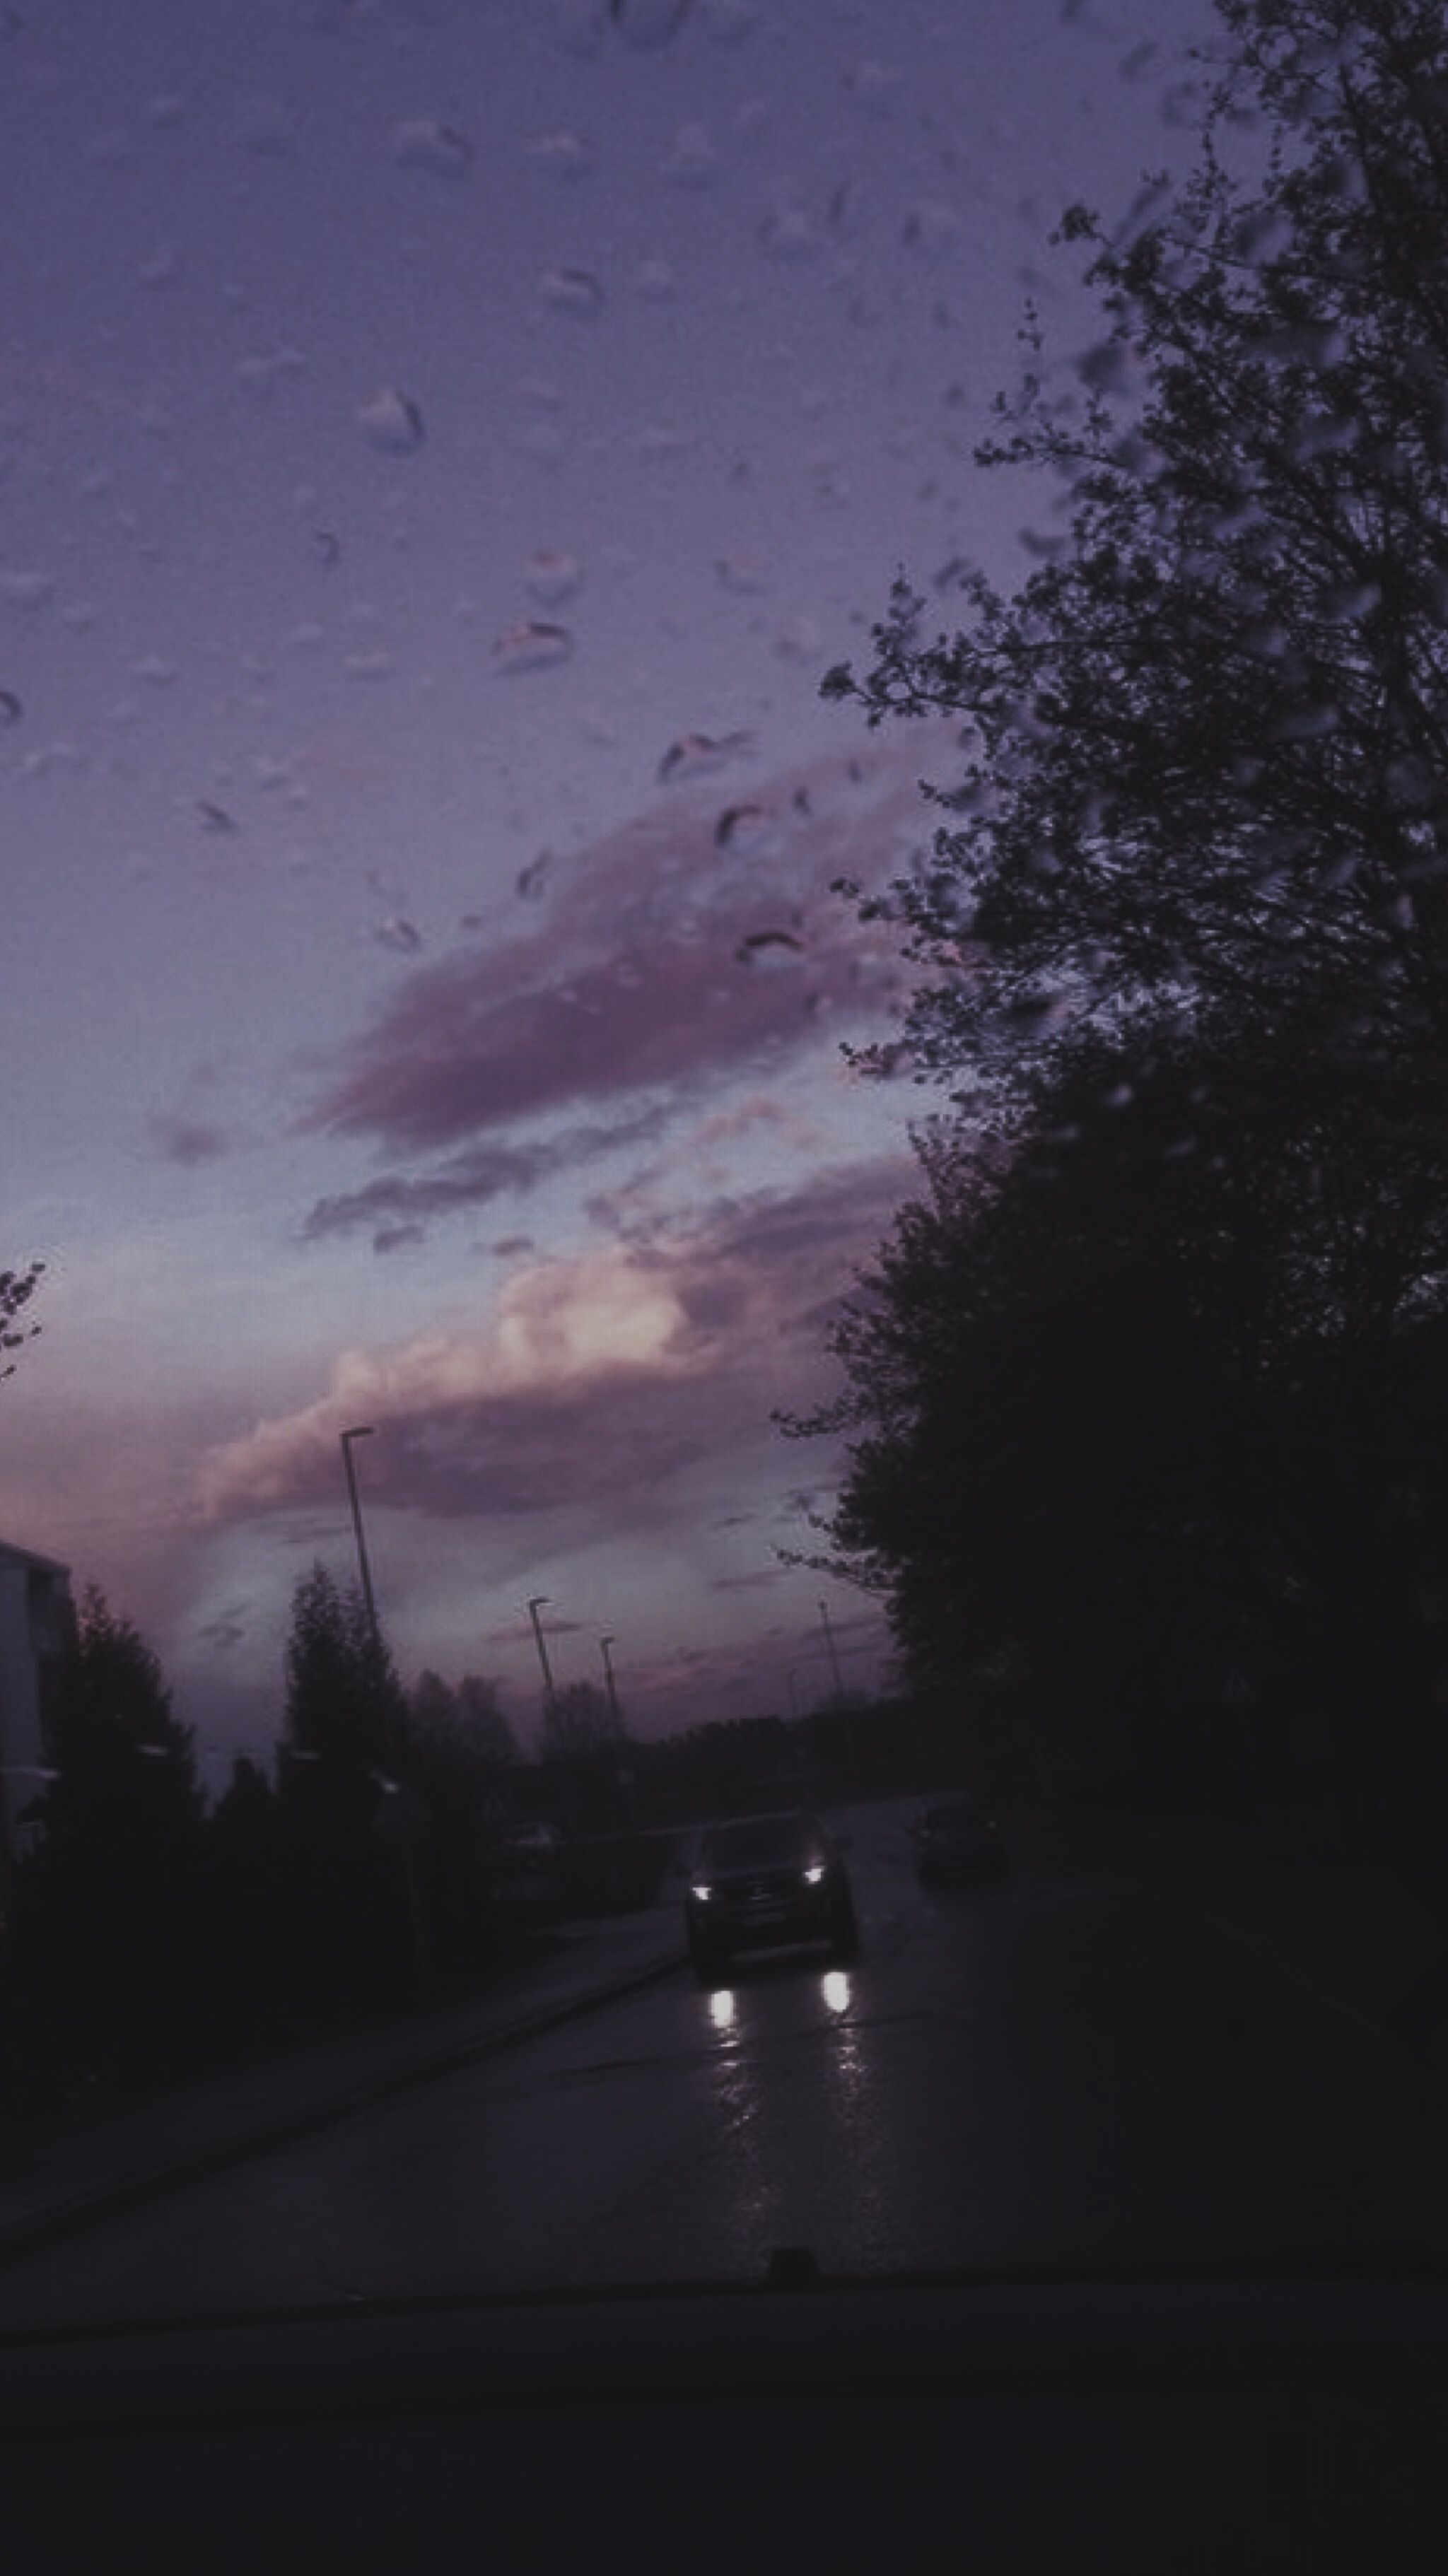 A car driving down a wet road at dusk. - Phone